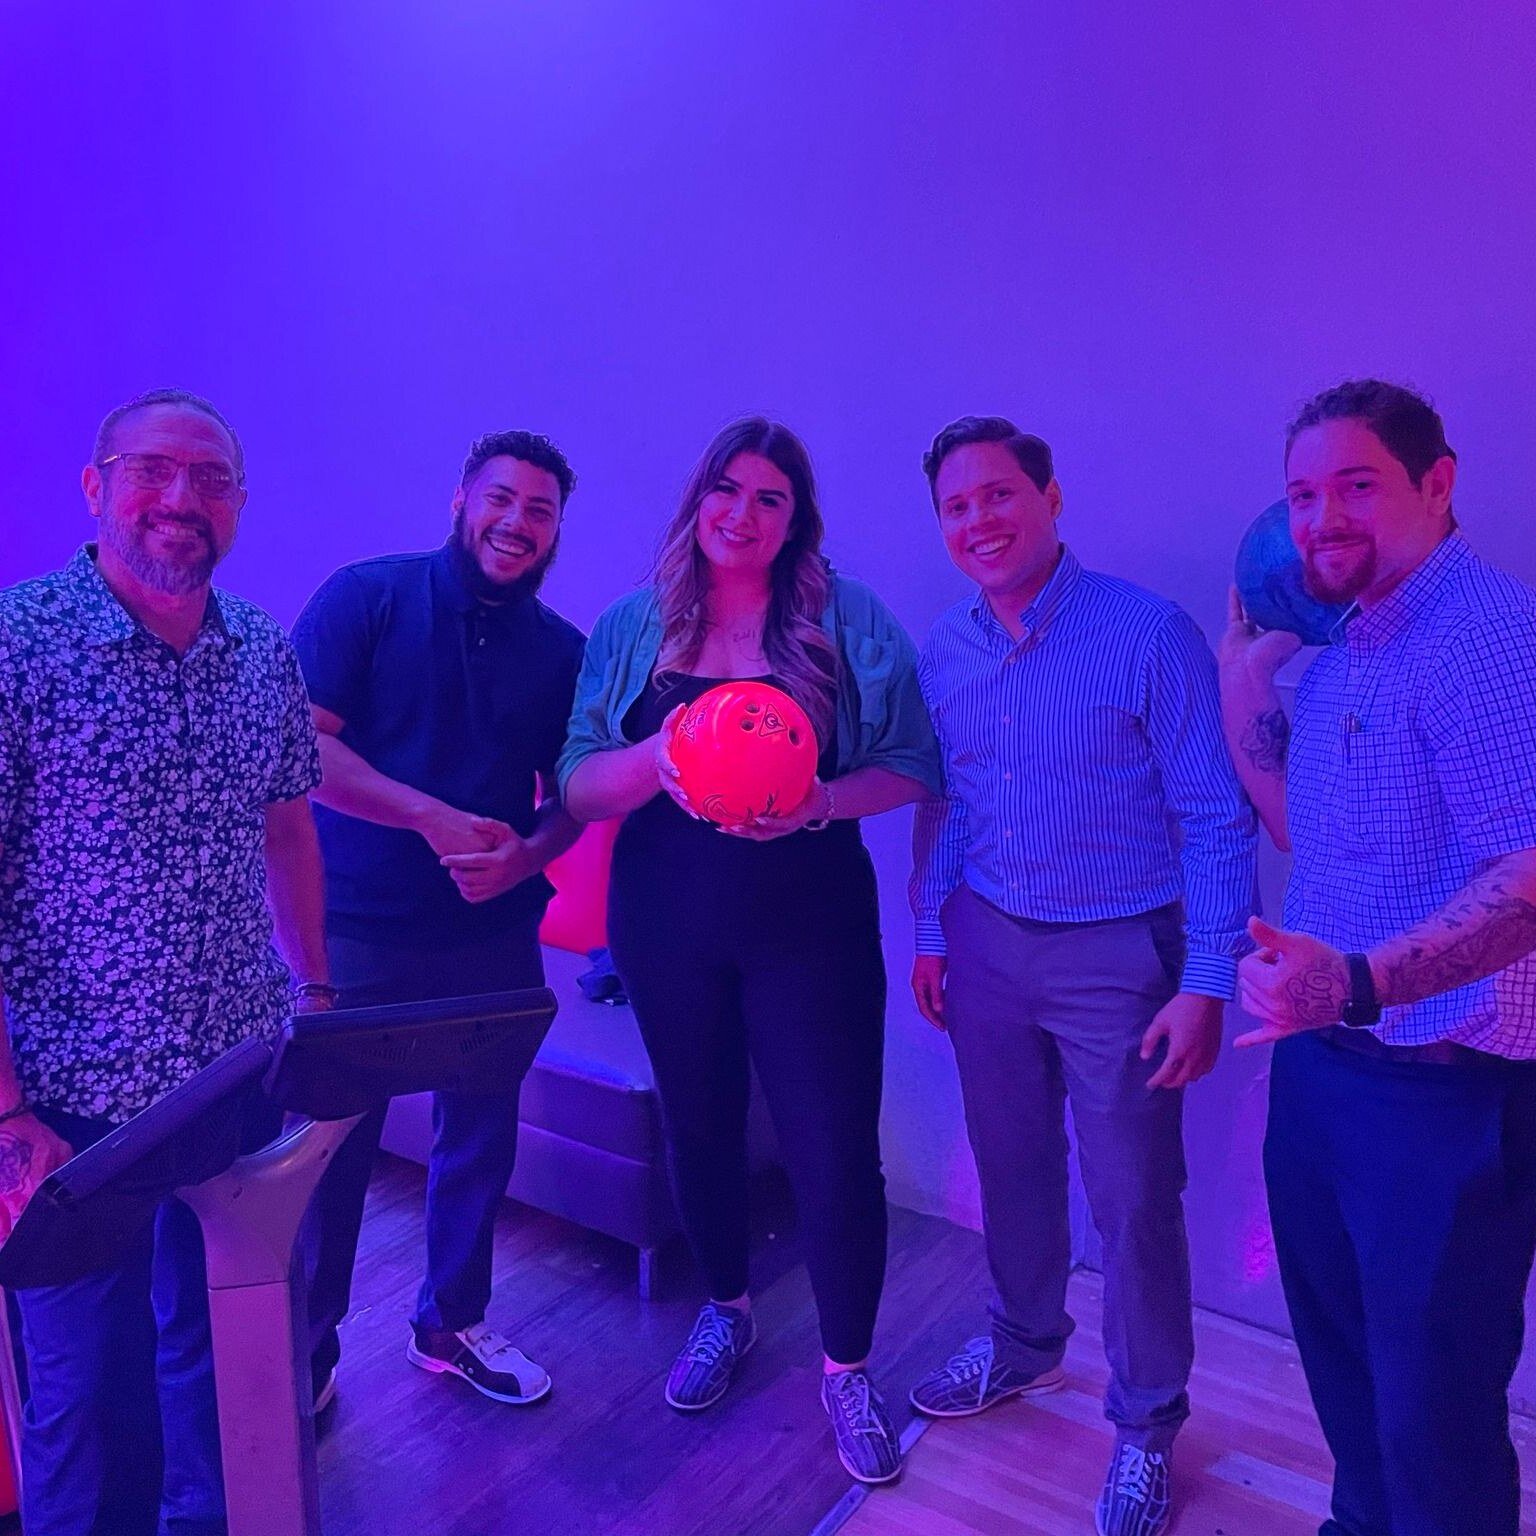 The team... the vibe... the bowling... electric ⚡️
 
 
 
#thecarvonisgroup #tcgmiami #tcgdallas #bowlingnight #glowbowl